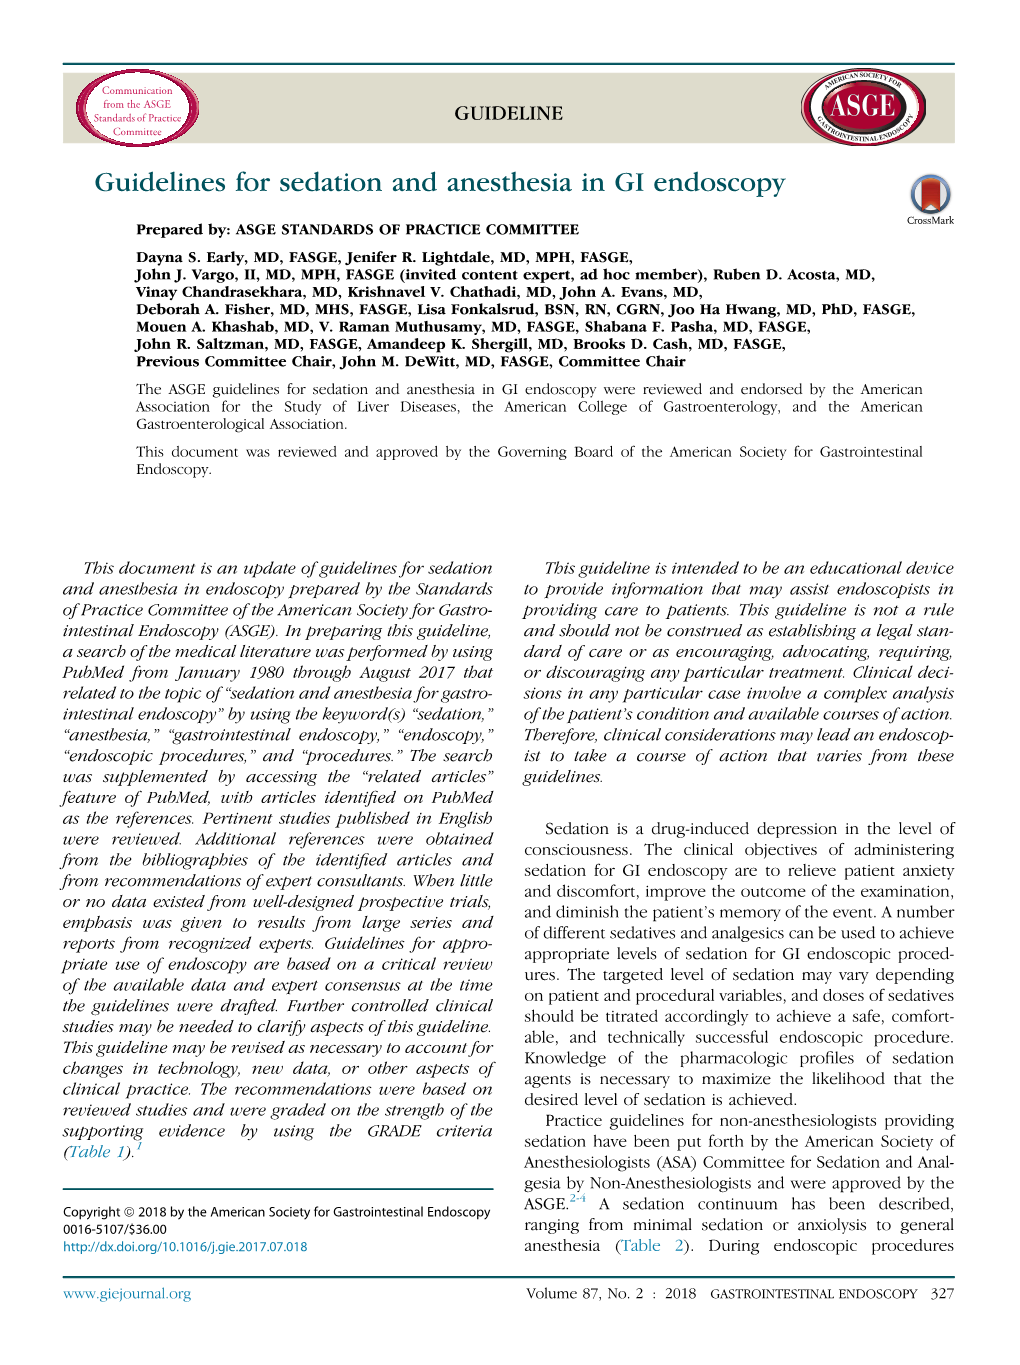 Guidelines for Sedation and Anesthesia in GI Endoscopy